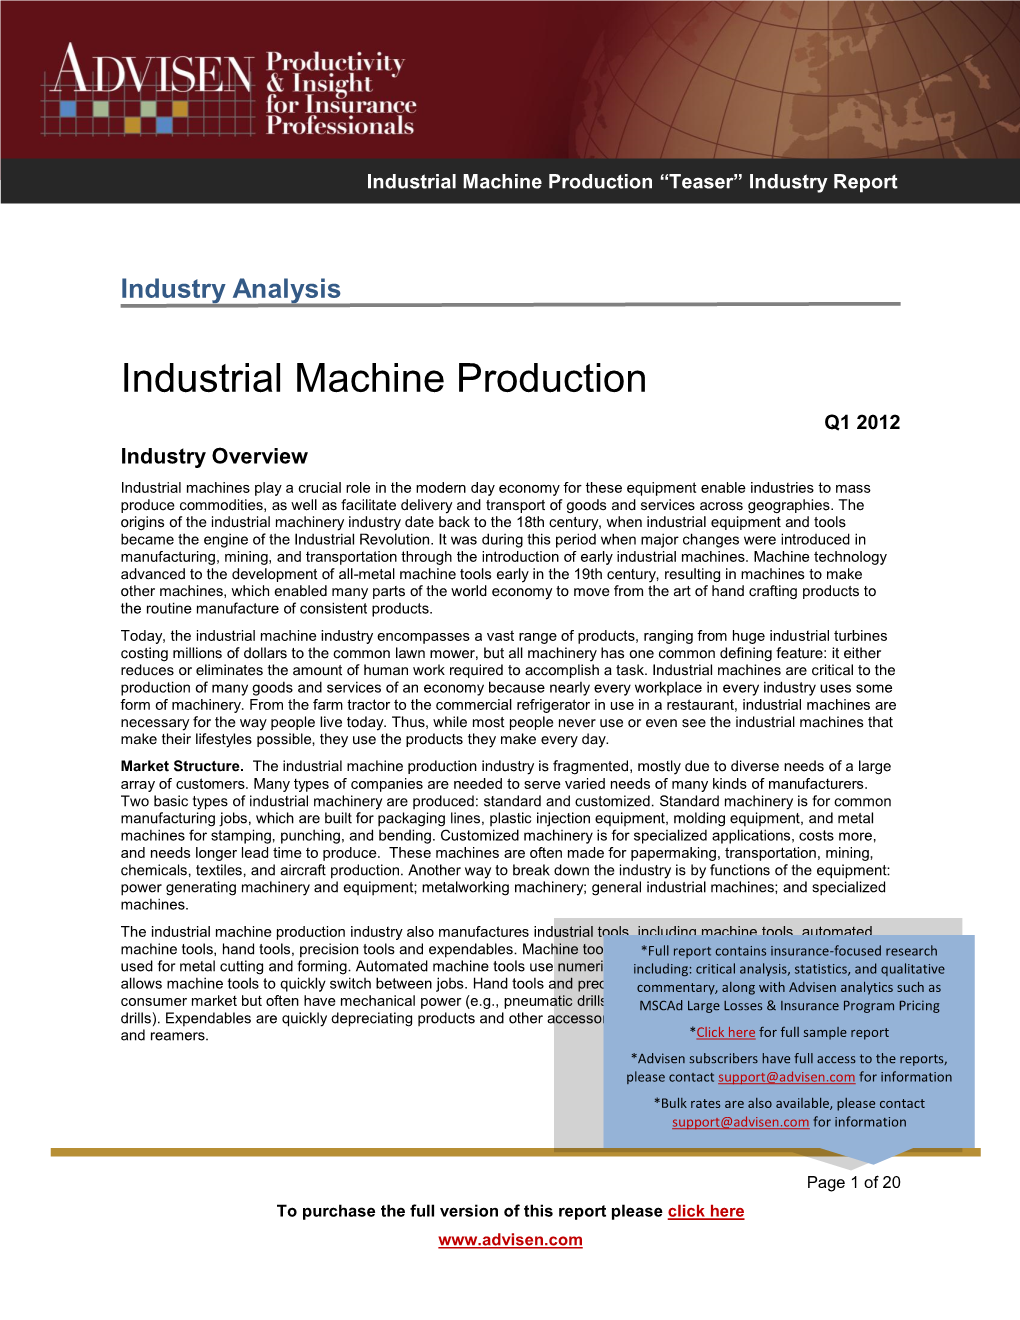 Industrial Machine Production “Teaser” Industry Report